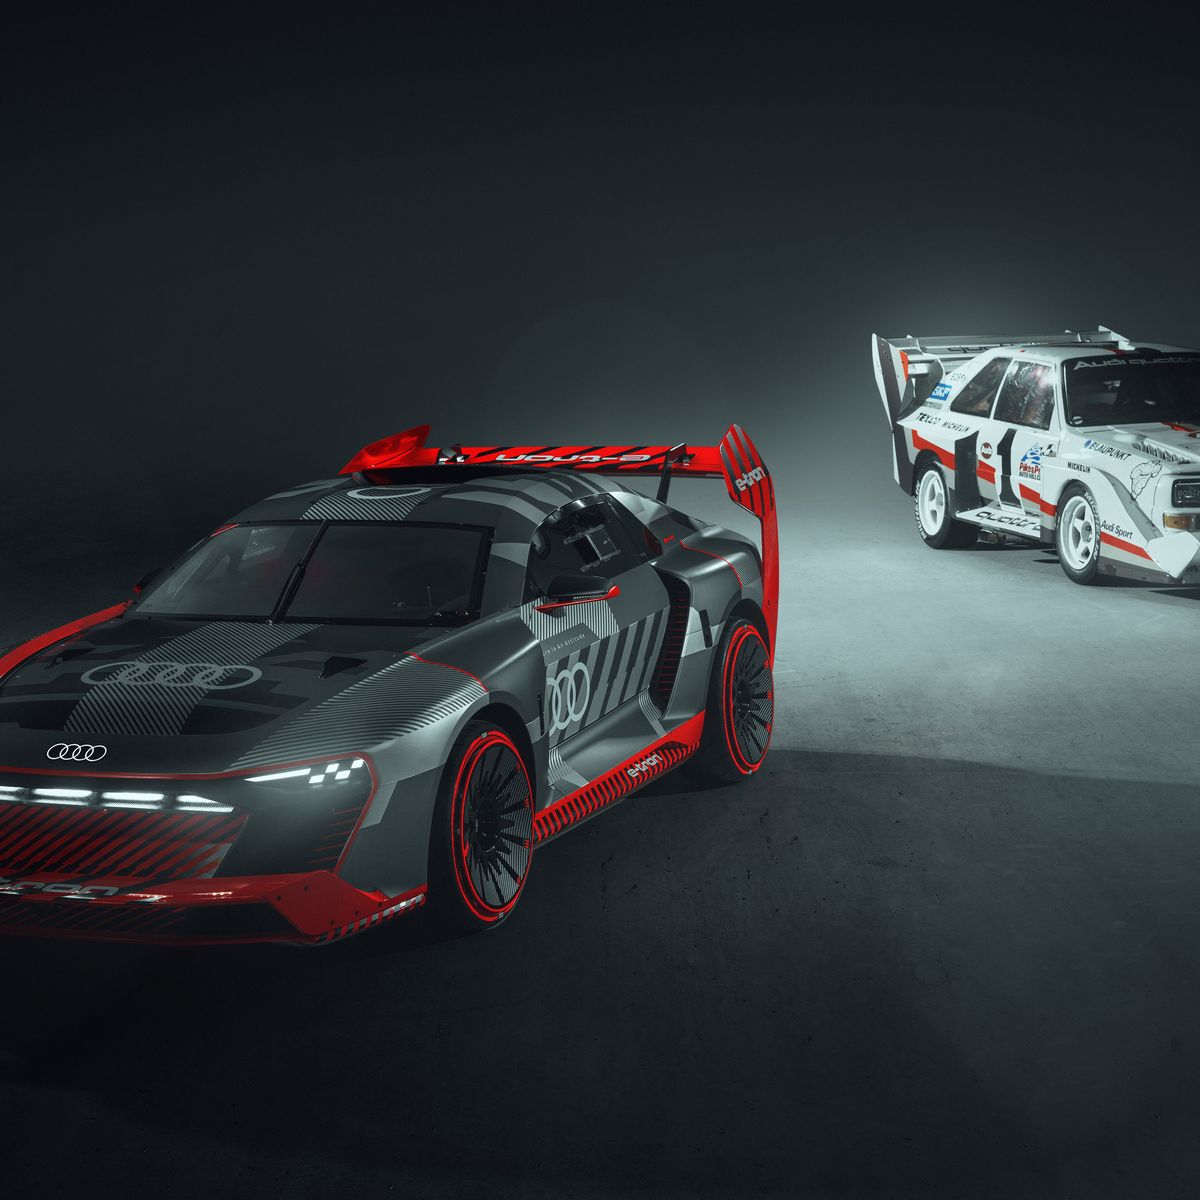 Ken Block Signs Up With Audi To Work On Electric Cars